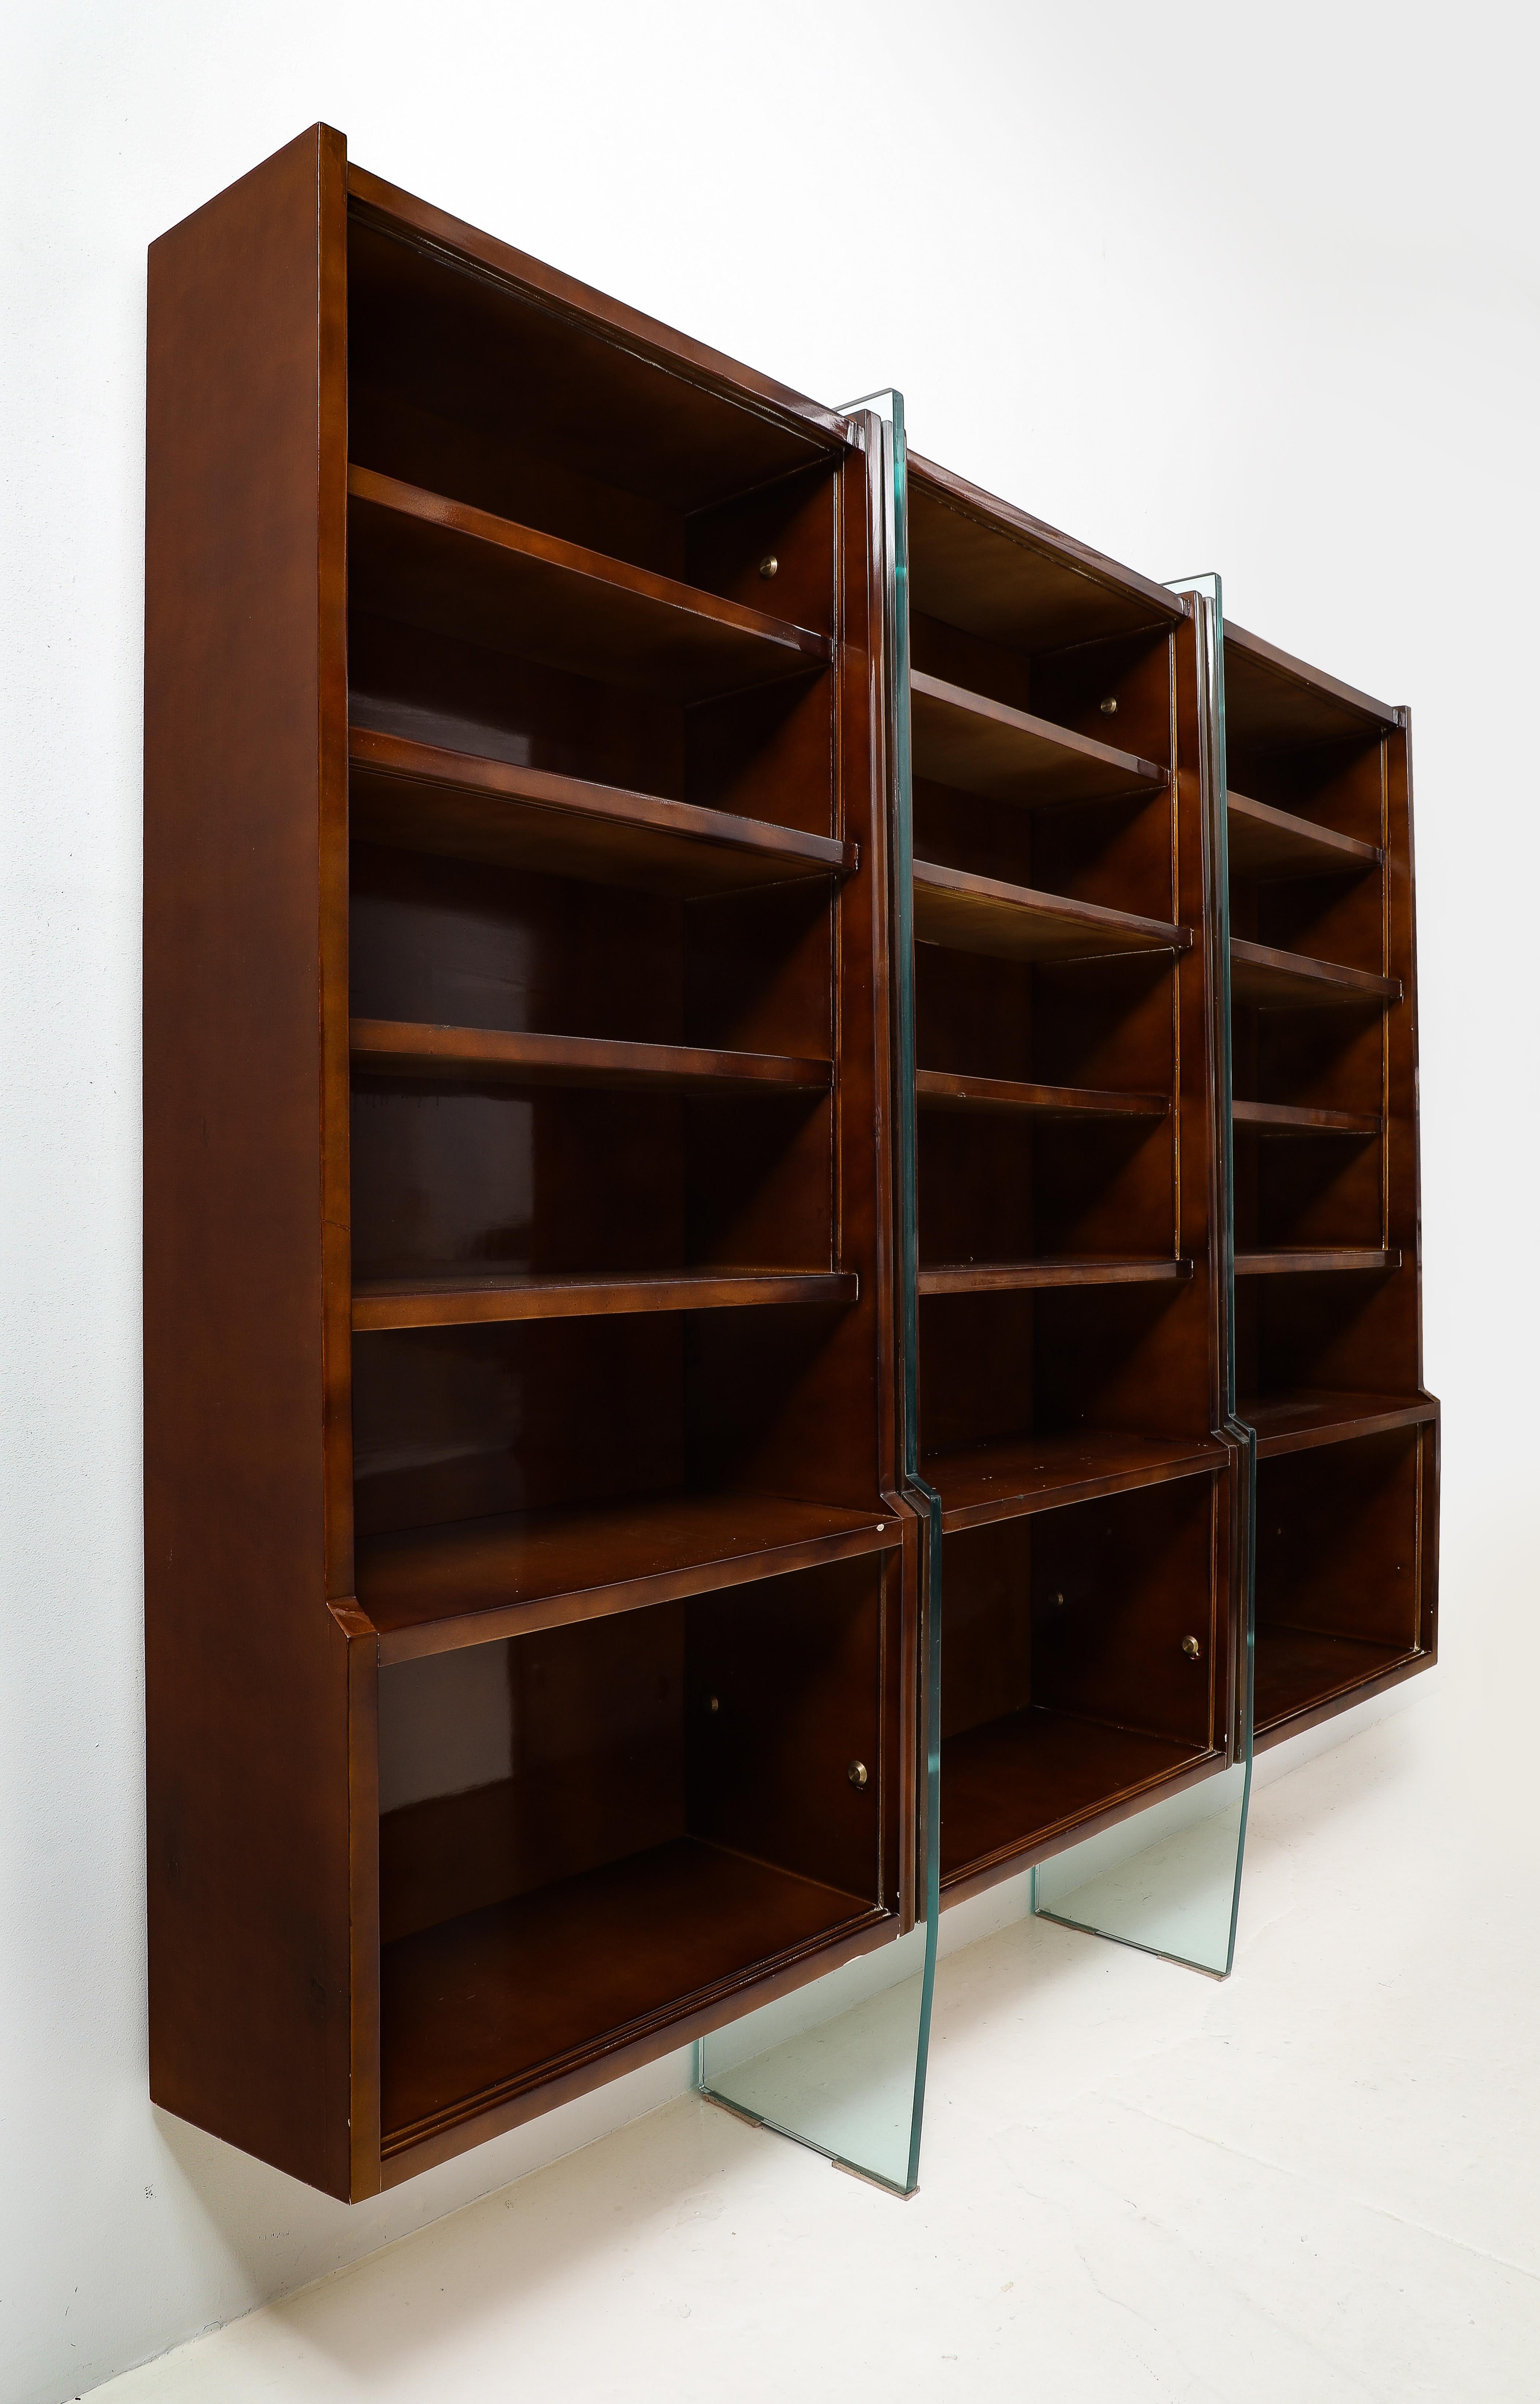 Raphael Raphel Bookcase in Lacquered Wood & Glass, France 1950's For Sale 2